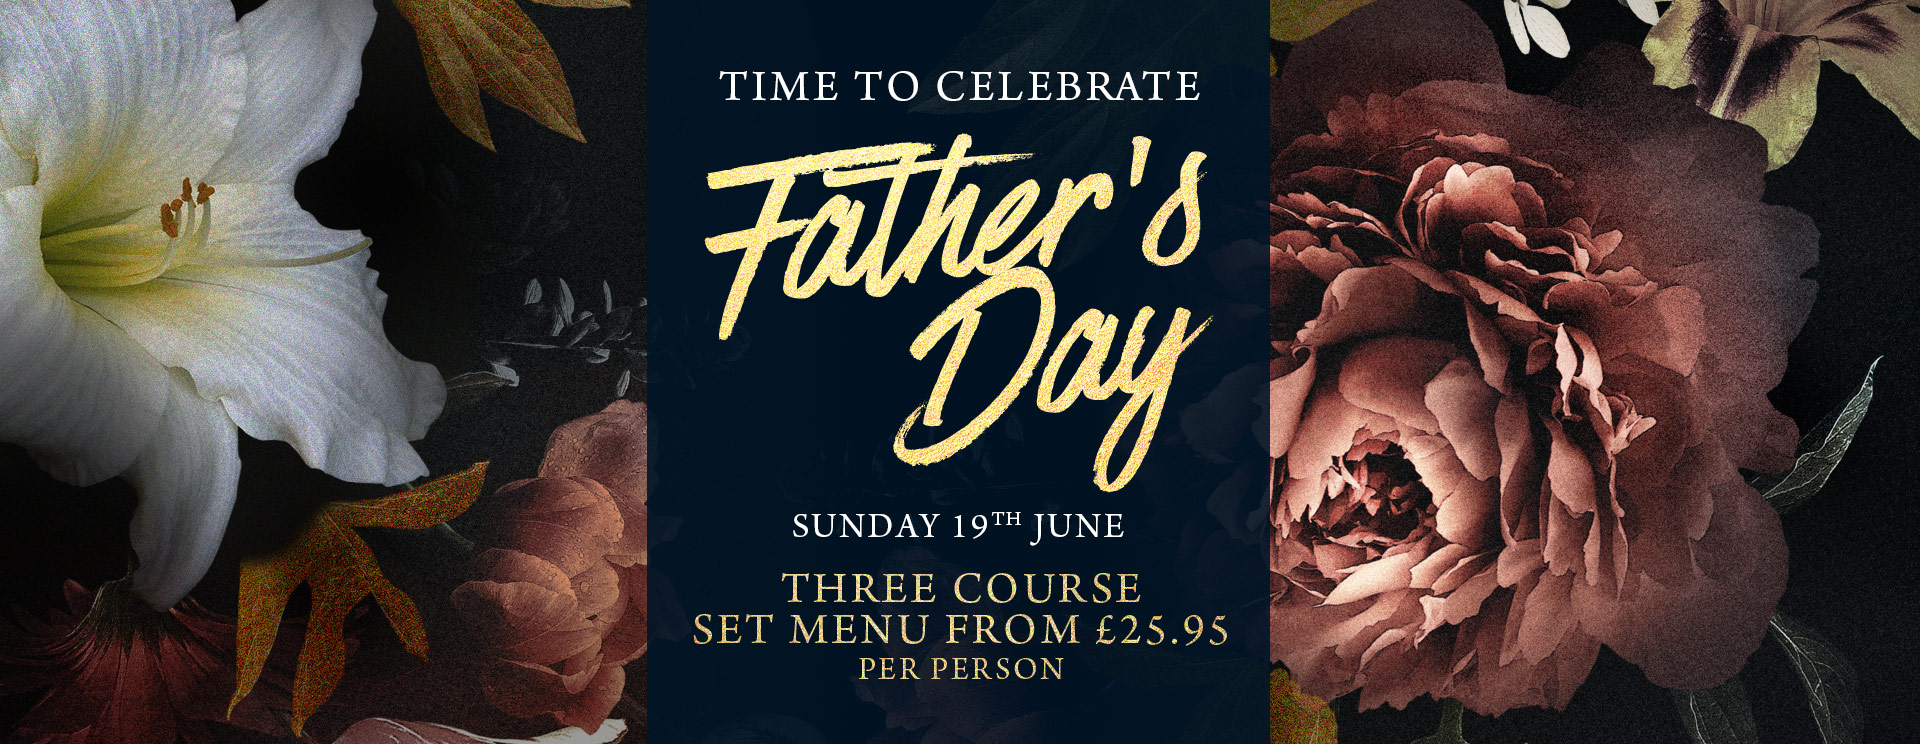 Fathers Day at The Swan